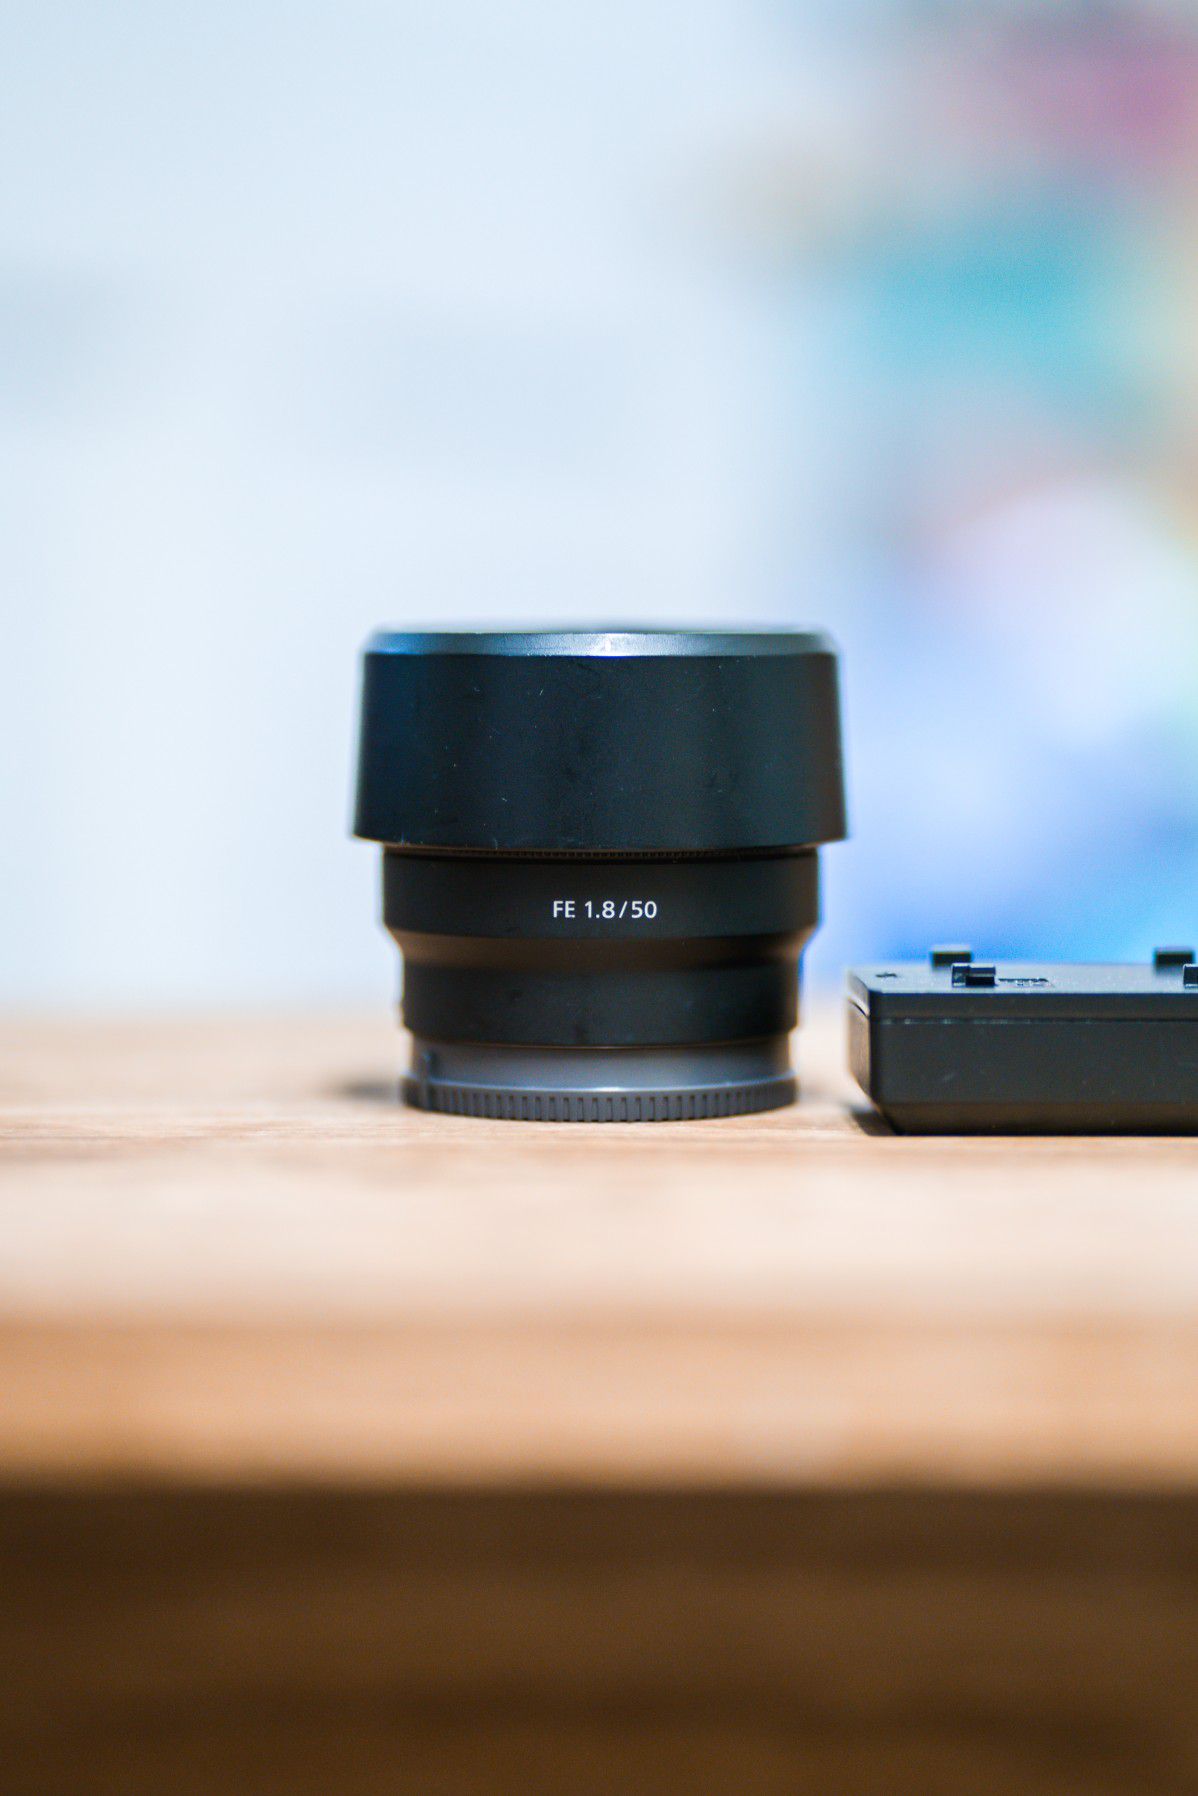 Sony 50mm f1.8 lens and ND filter